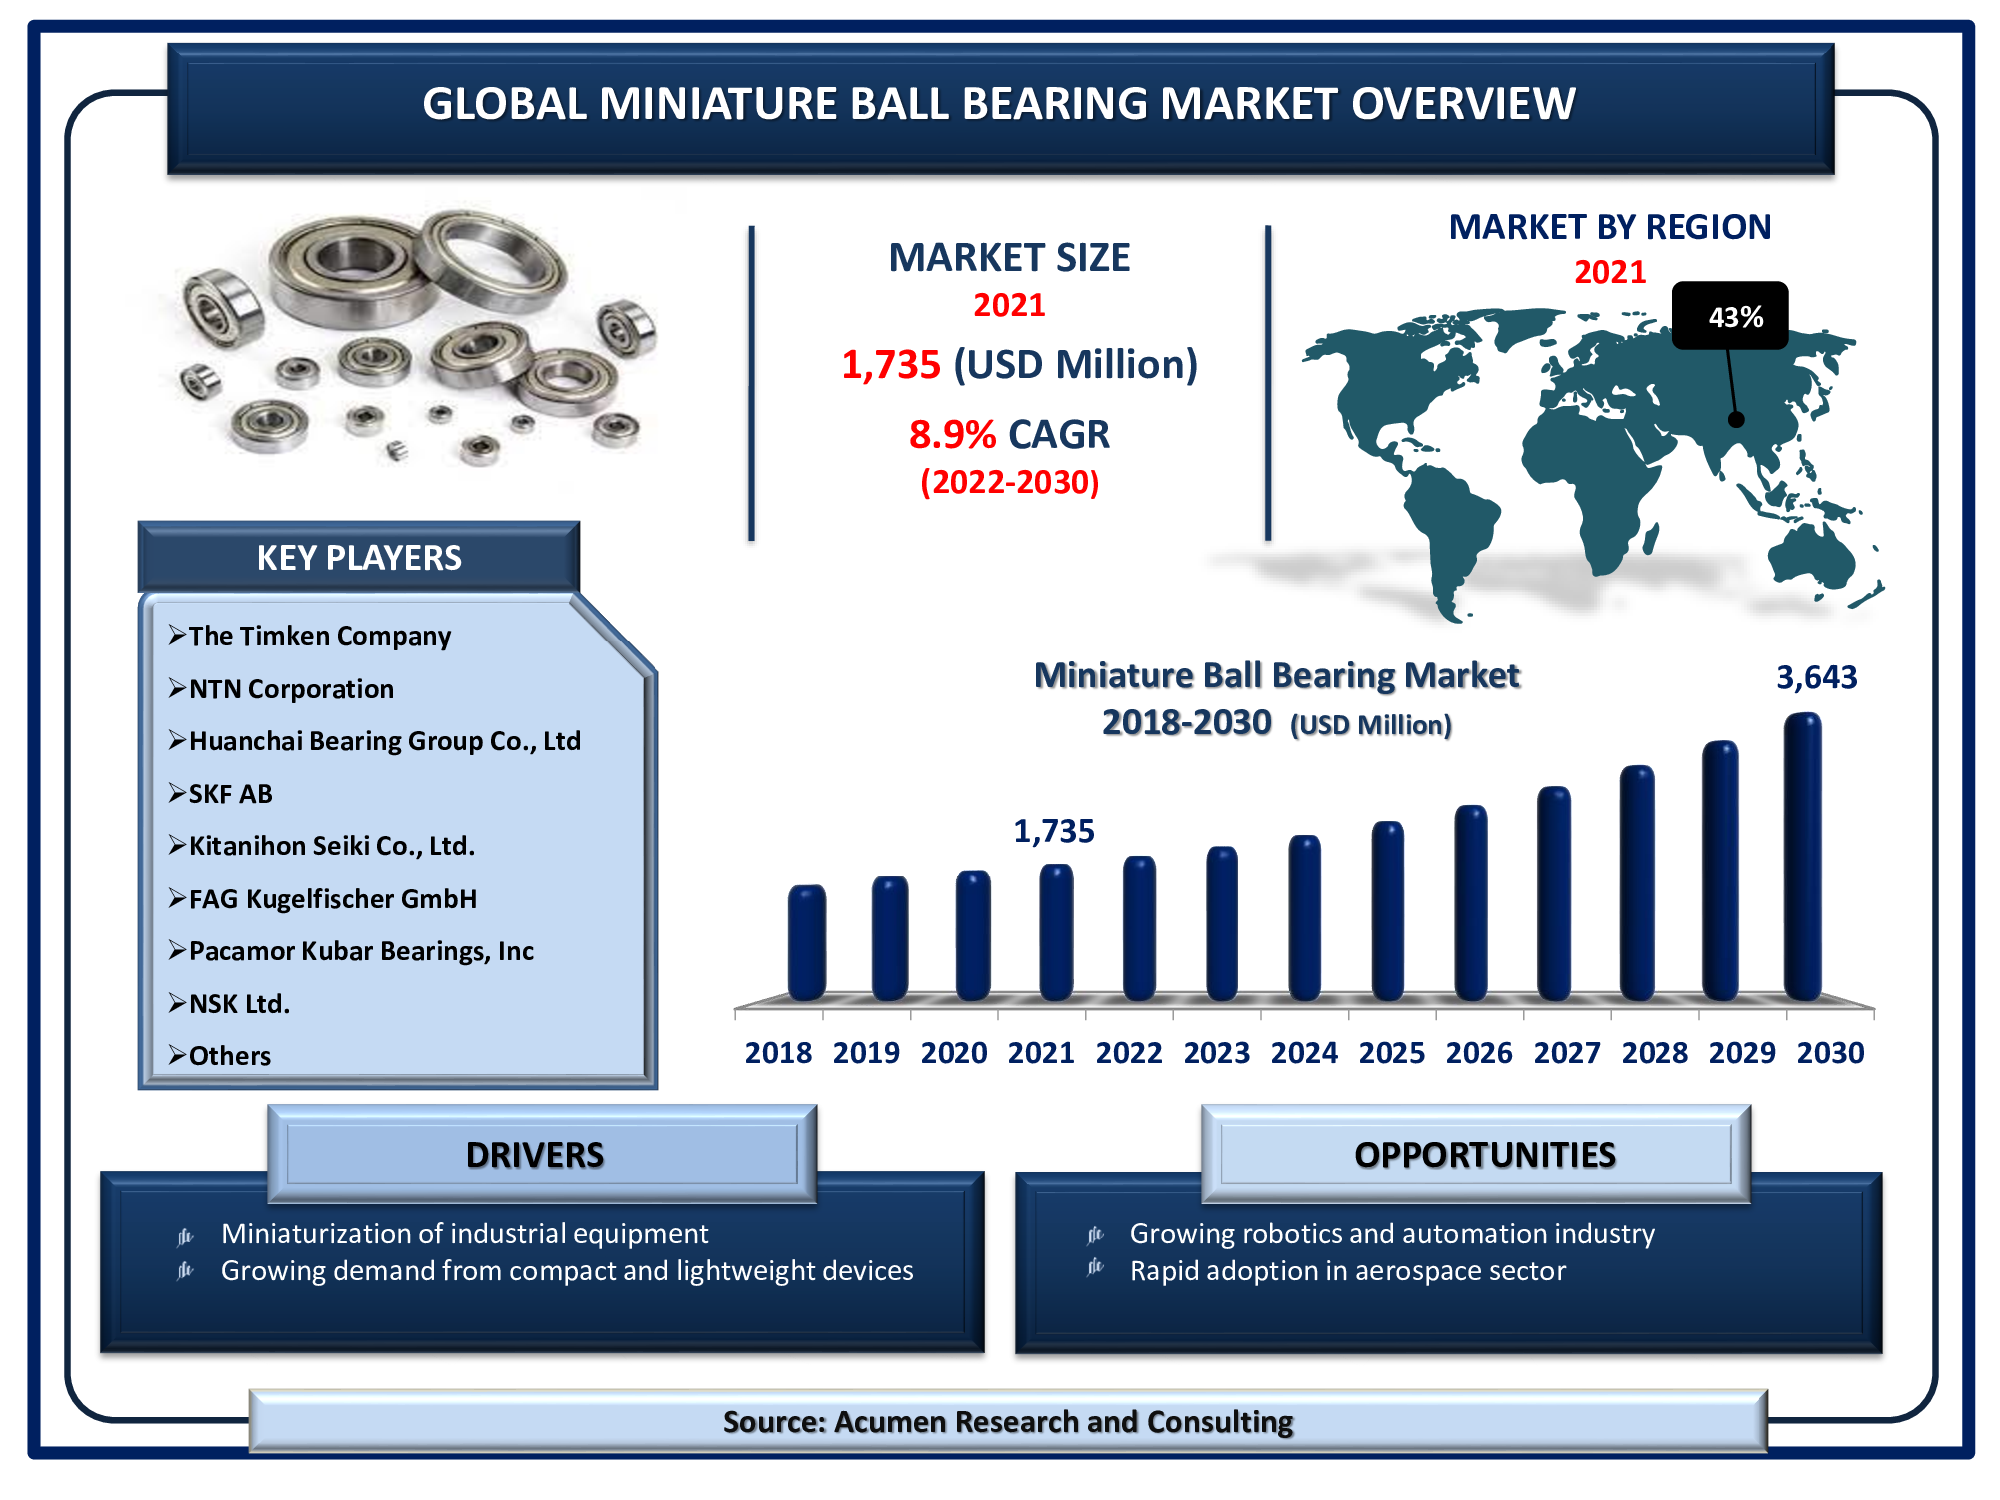 The Global Miniature Ball Bearing Market Size is valued at USD 1,735 million in 2021 and is estimated to achieve a market size of USD 3,643 million by 2030; growing at a CAGR of 8.9%.